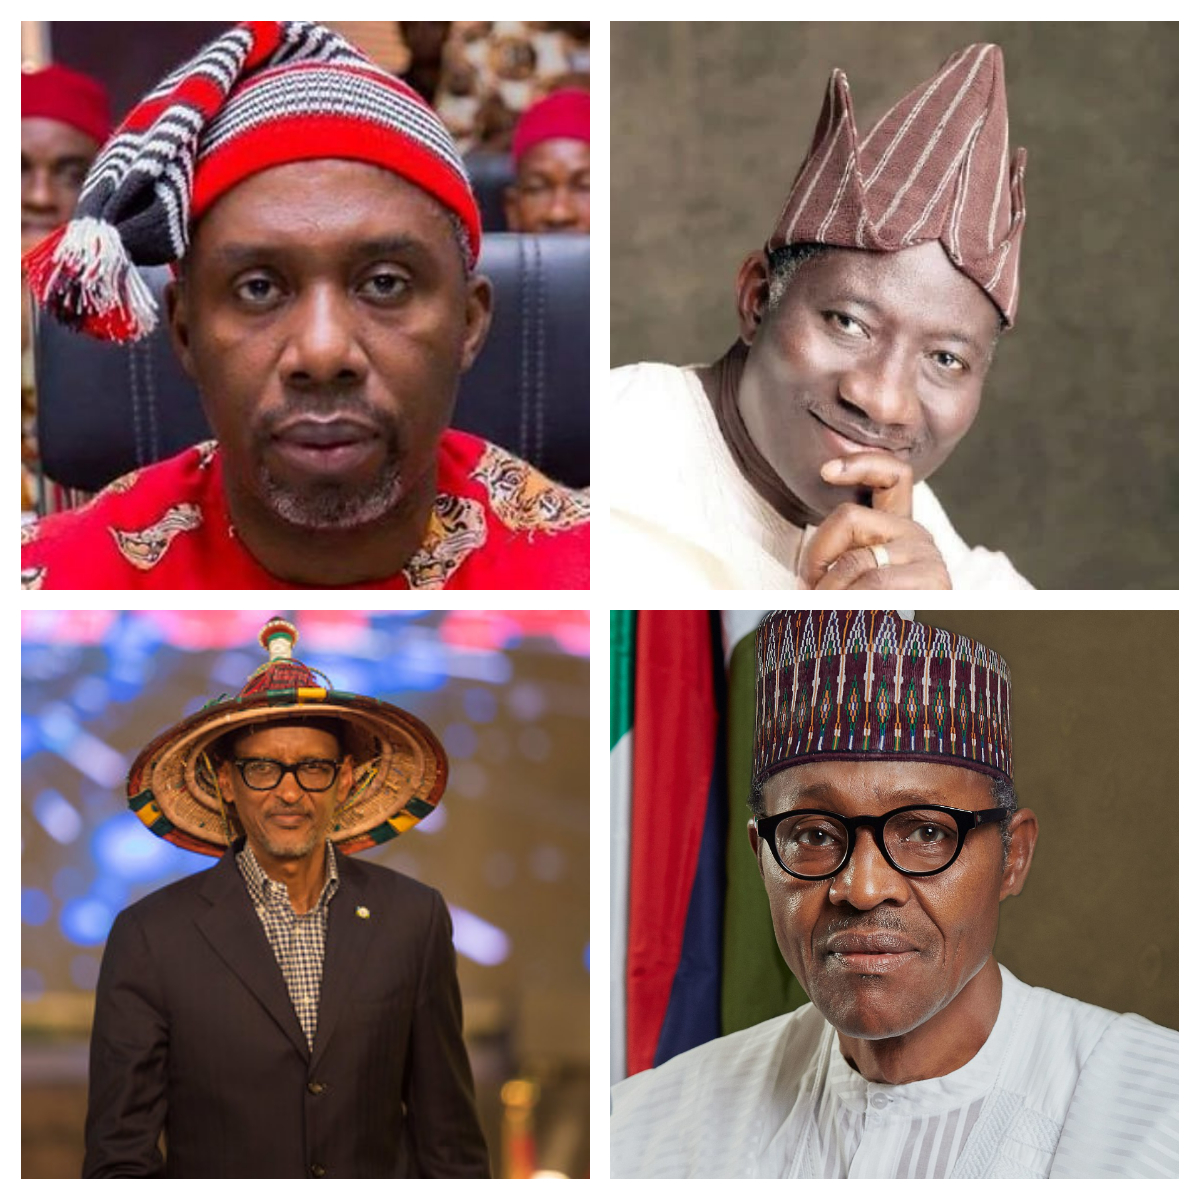 Different caps and hats worn by African men | Pulse Nigeria